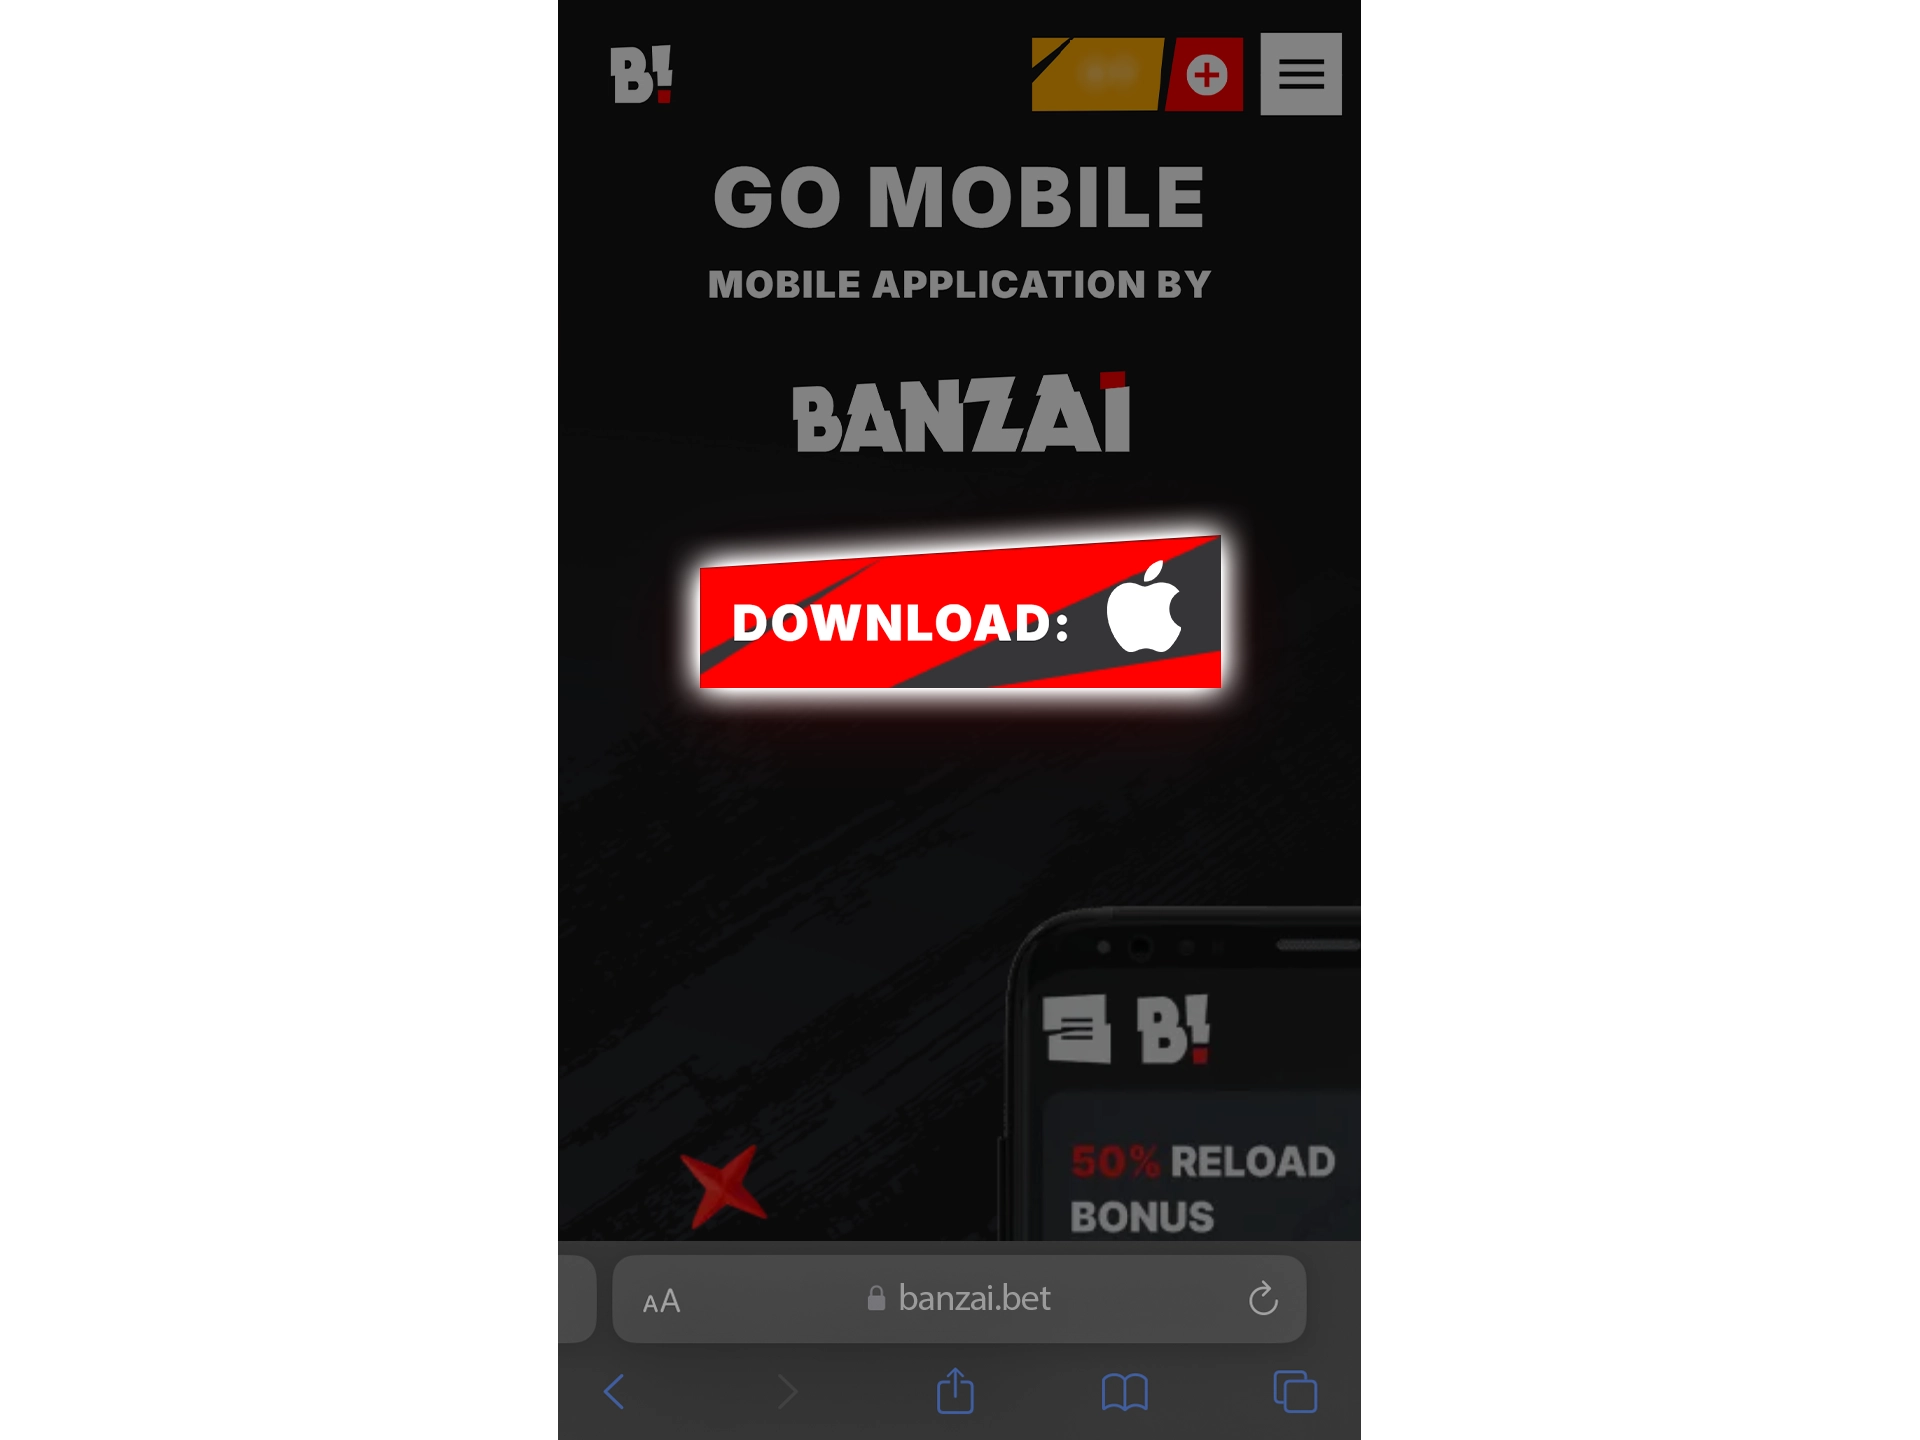 Open the mobile app section and download the Banzai Bet app for iOS.